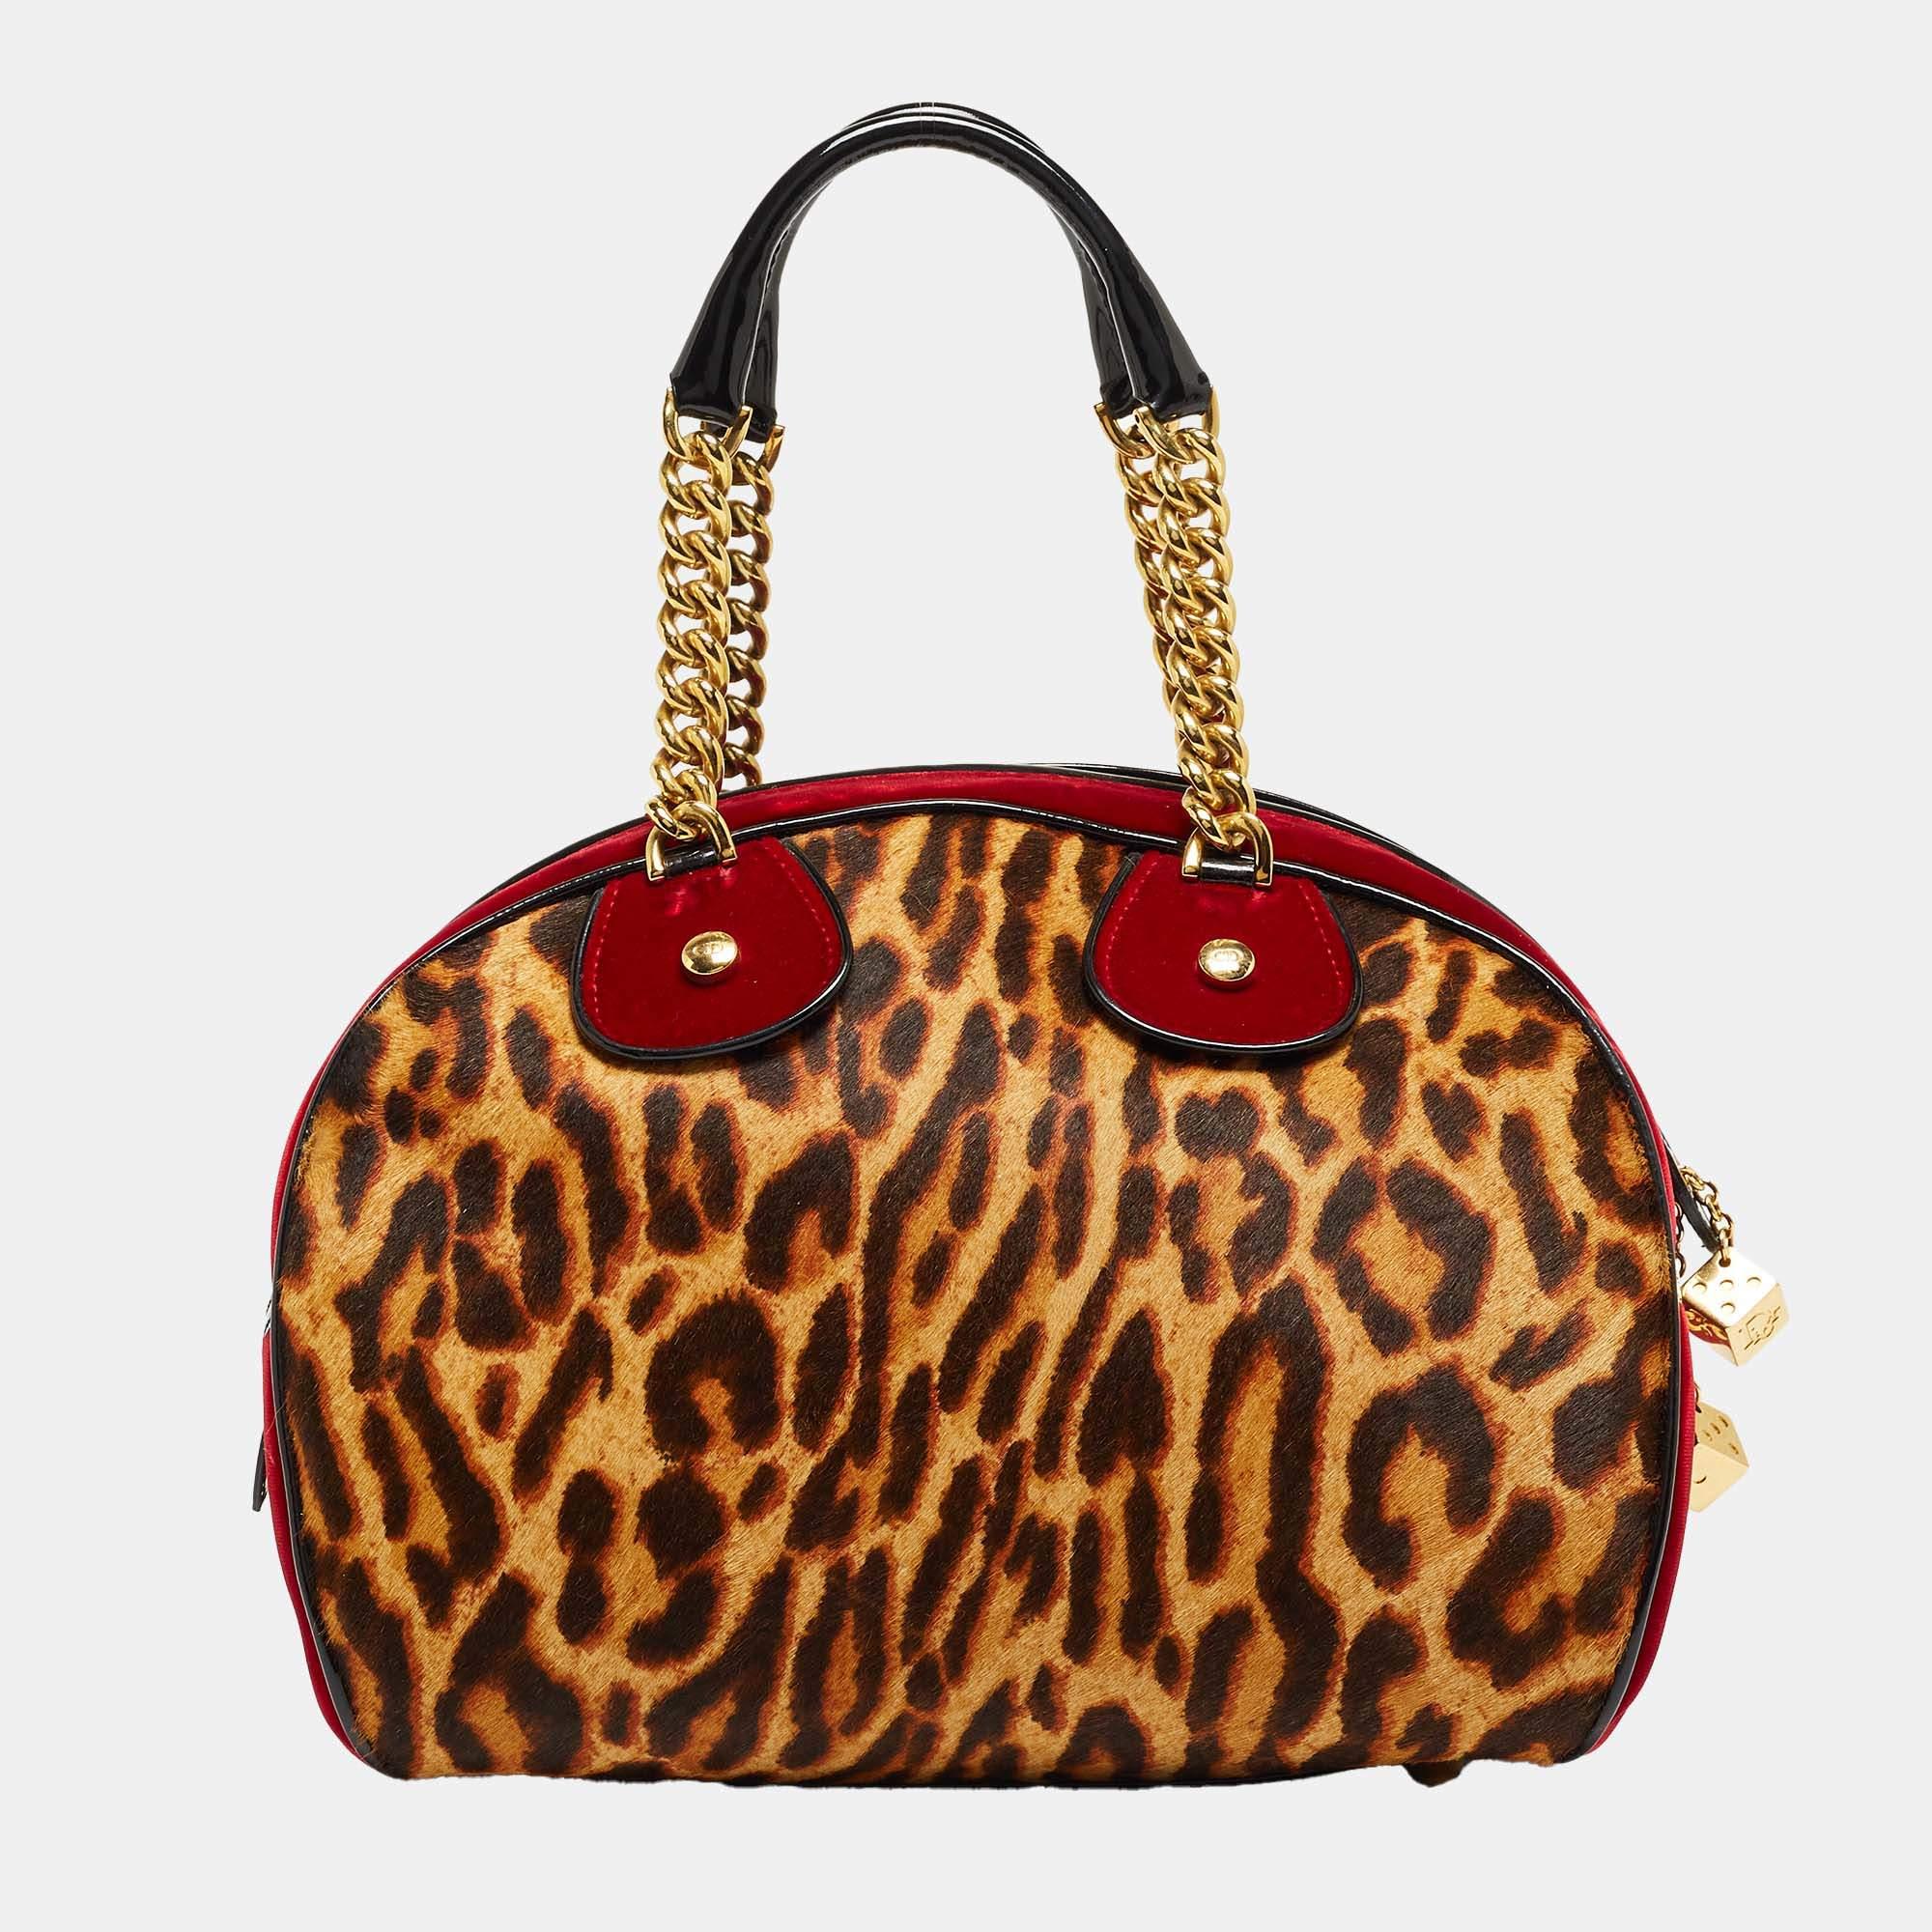 Spacious and stylish, this Gambler Dice bag is an offering by Dior. It has been crafted from leopard-printed calfhair, velvet as well as patent leather, and designed with dangling DIOR metal dice and two chainlink handles. The nylon interior will